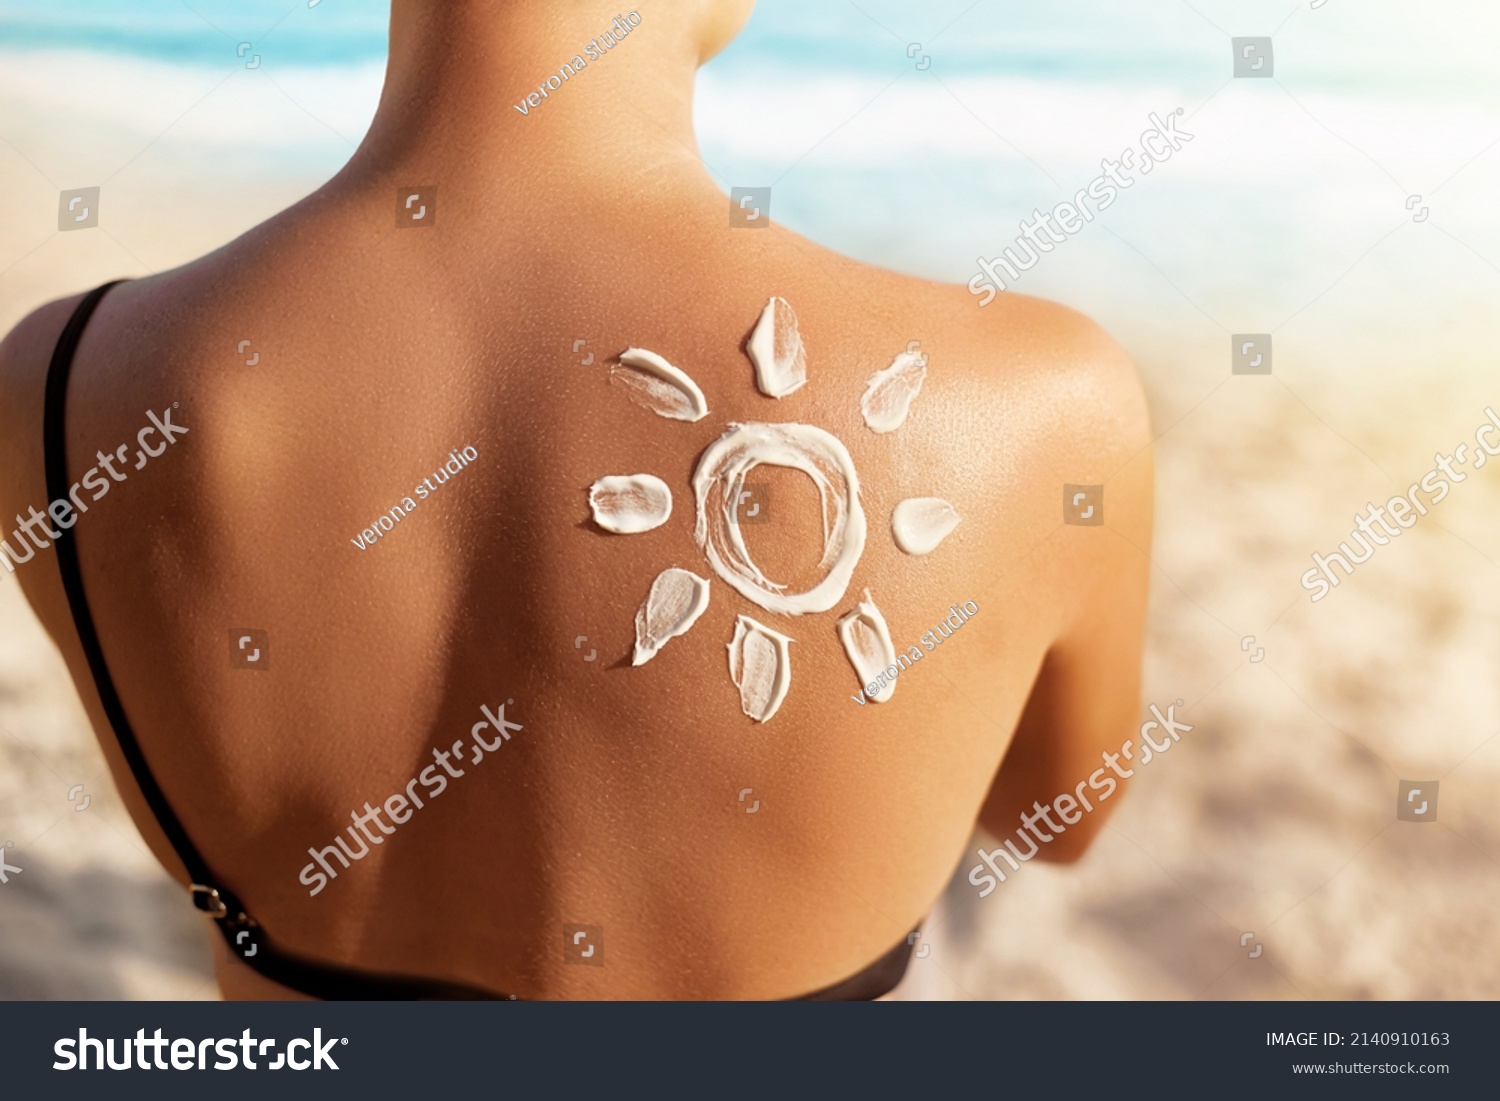 Sun Protection.Sun Cream. Woman Applying Sun Cream on Tanned  Shoulder In Form Of The Sun. Skin and Body Care. Girl Using Sunscreen to Skin.  #2140910163